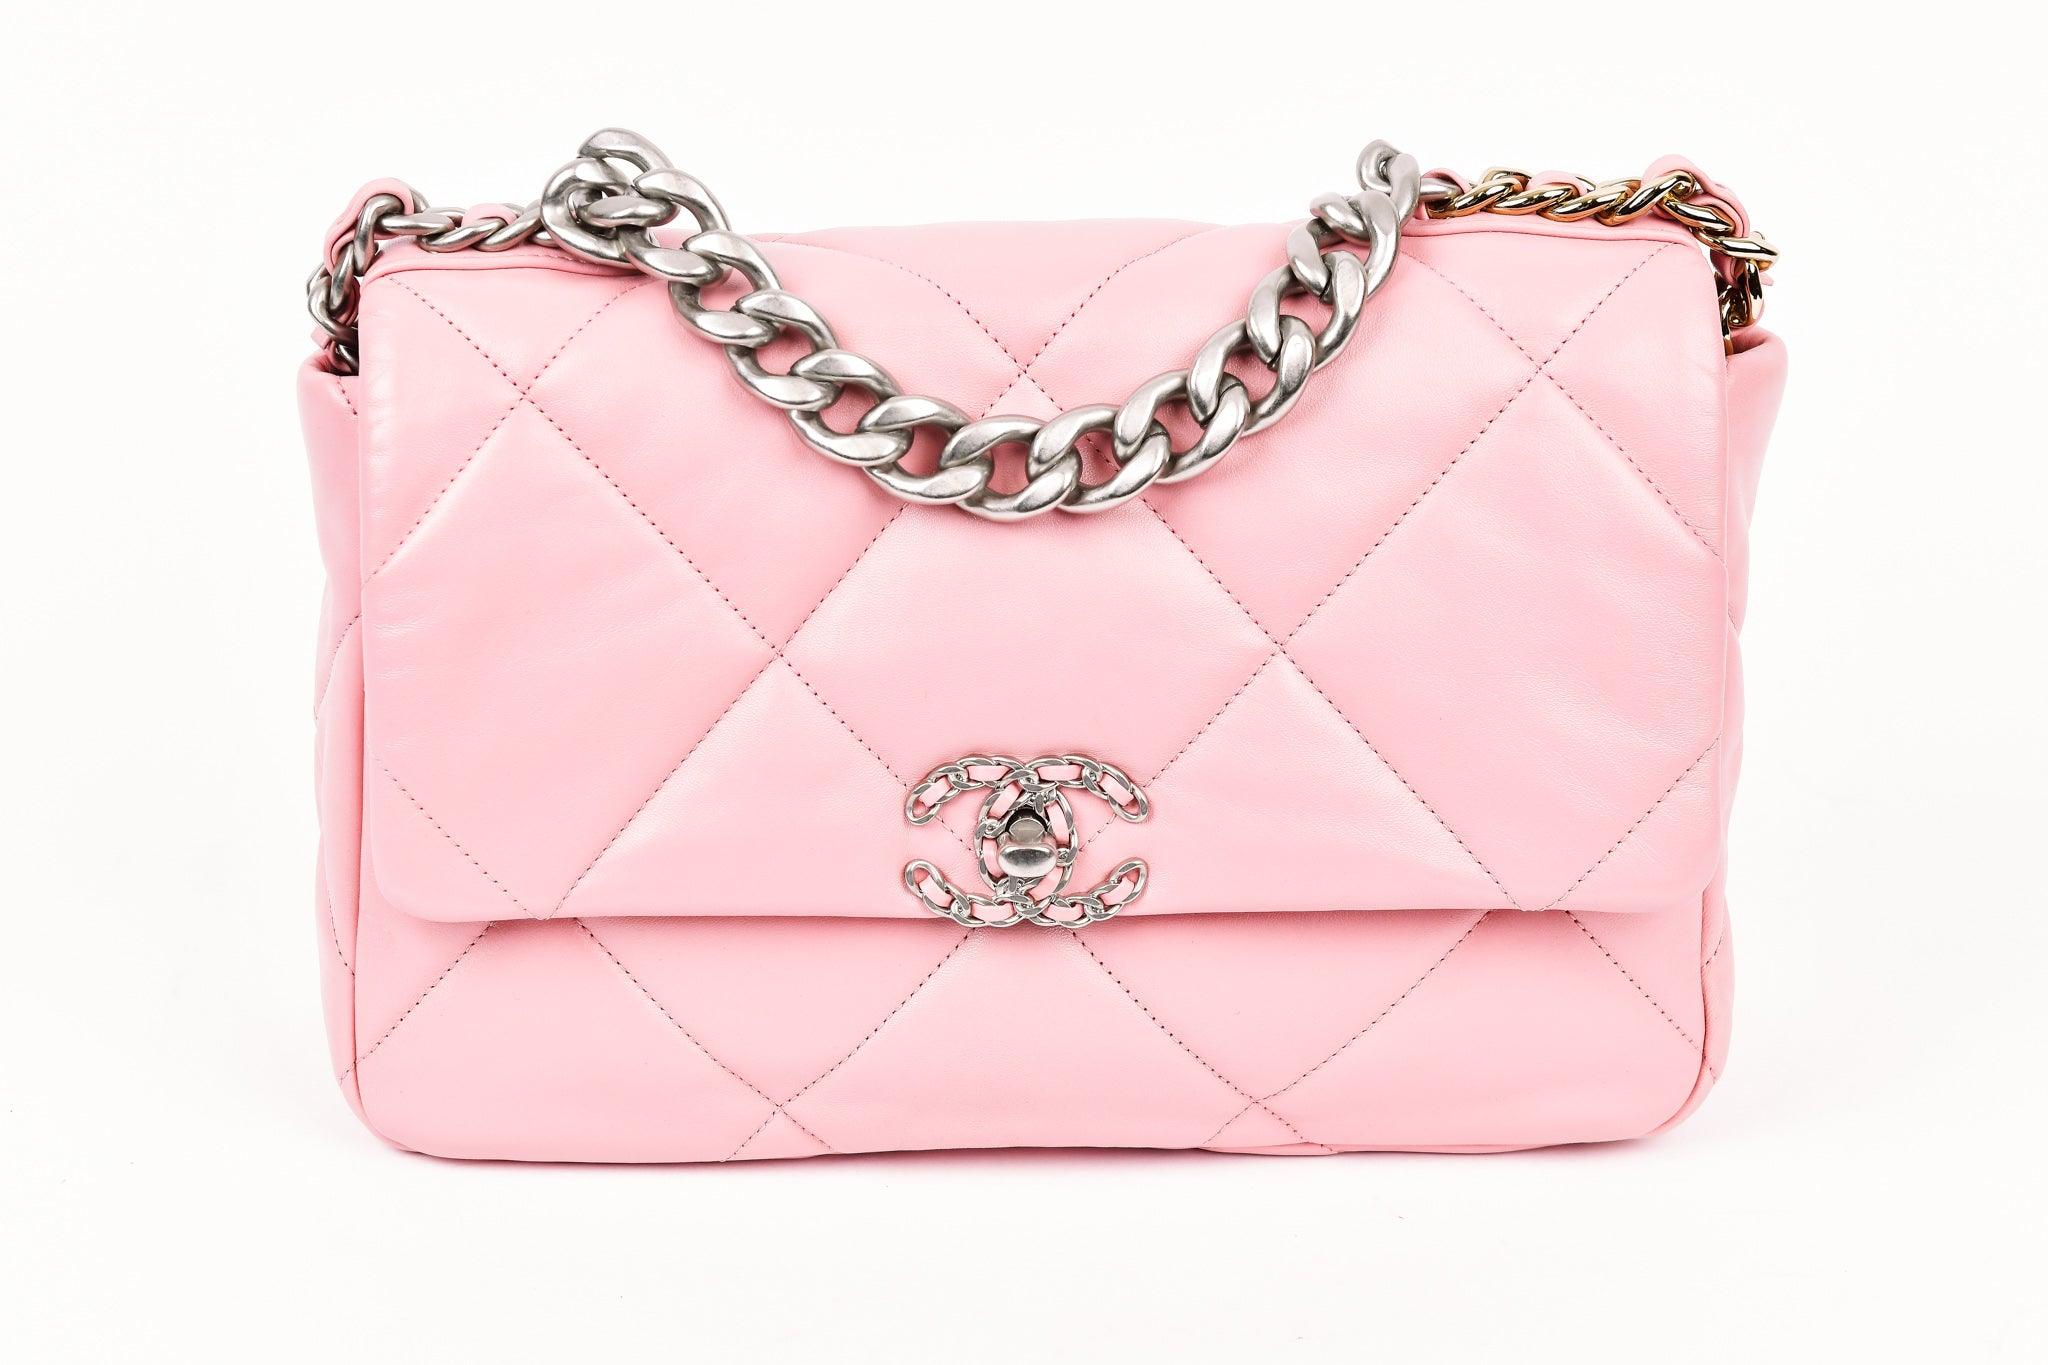 CHANEL Iridescent Lambskin Quilted Medium Chanel 19 Flap Pink 1005219   FASHIONPHILE